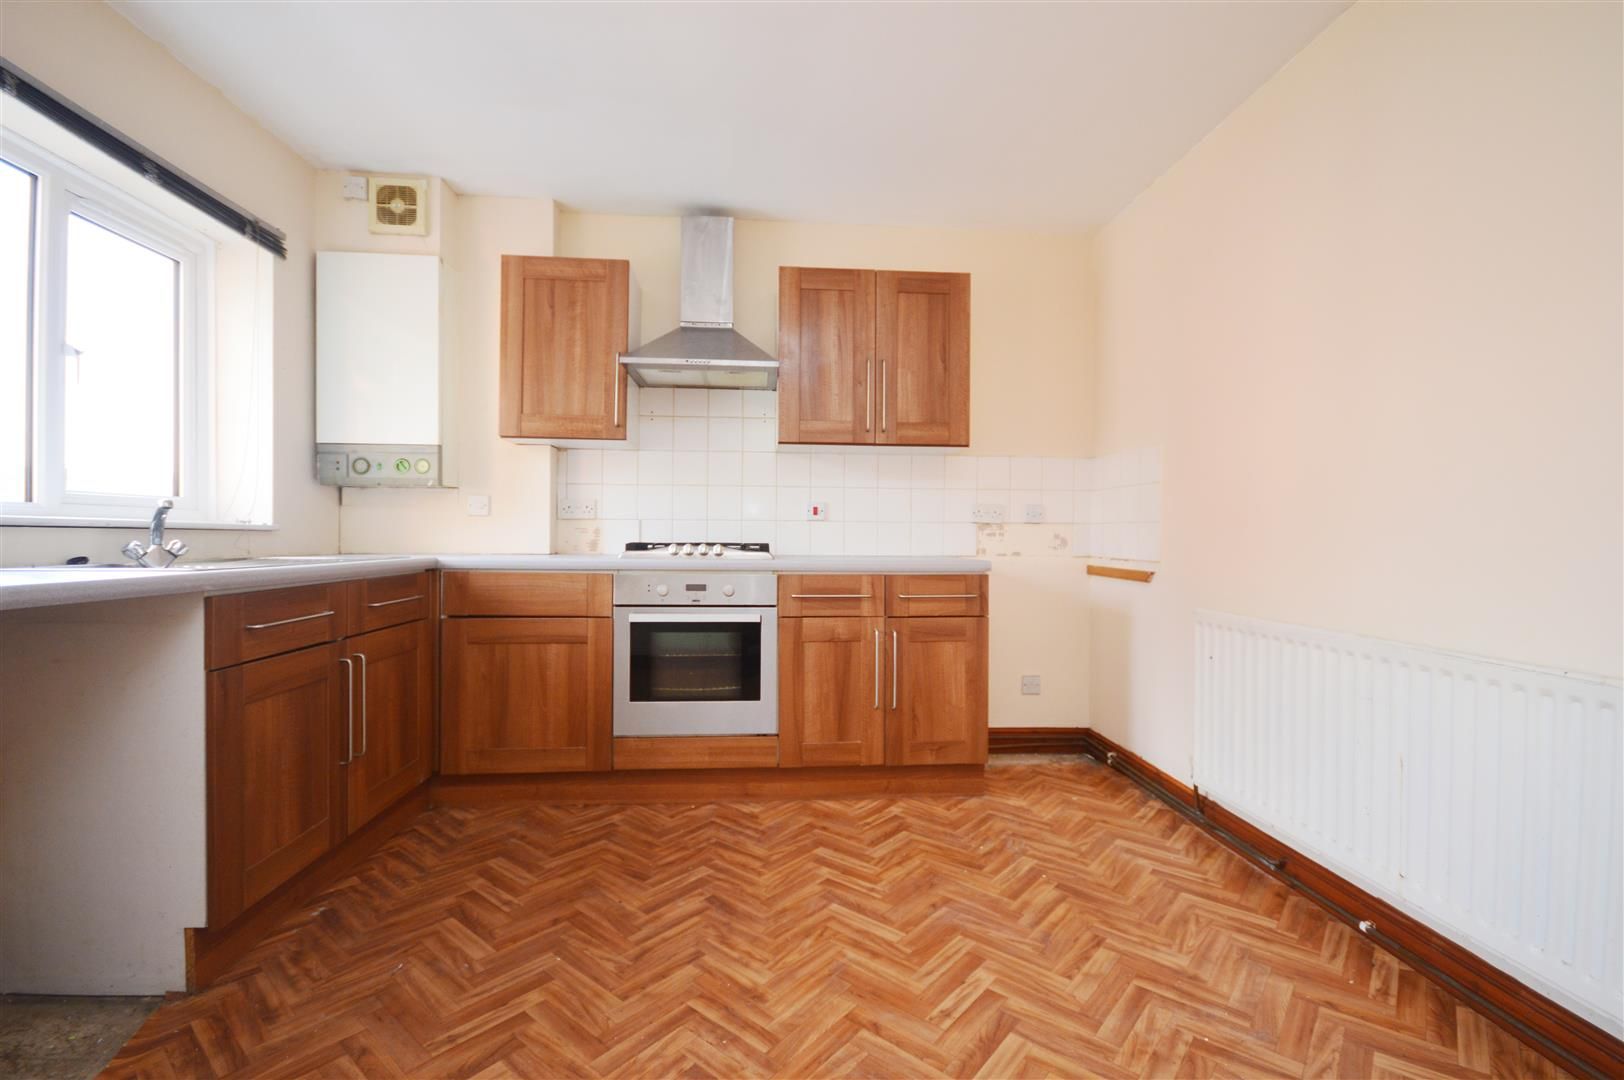 2 bed terraced for sale in Lower Bullingham - Property Image 1